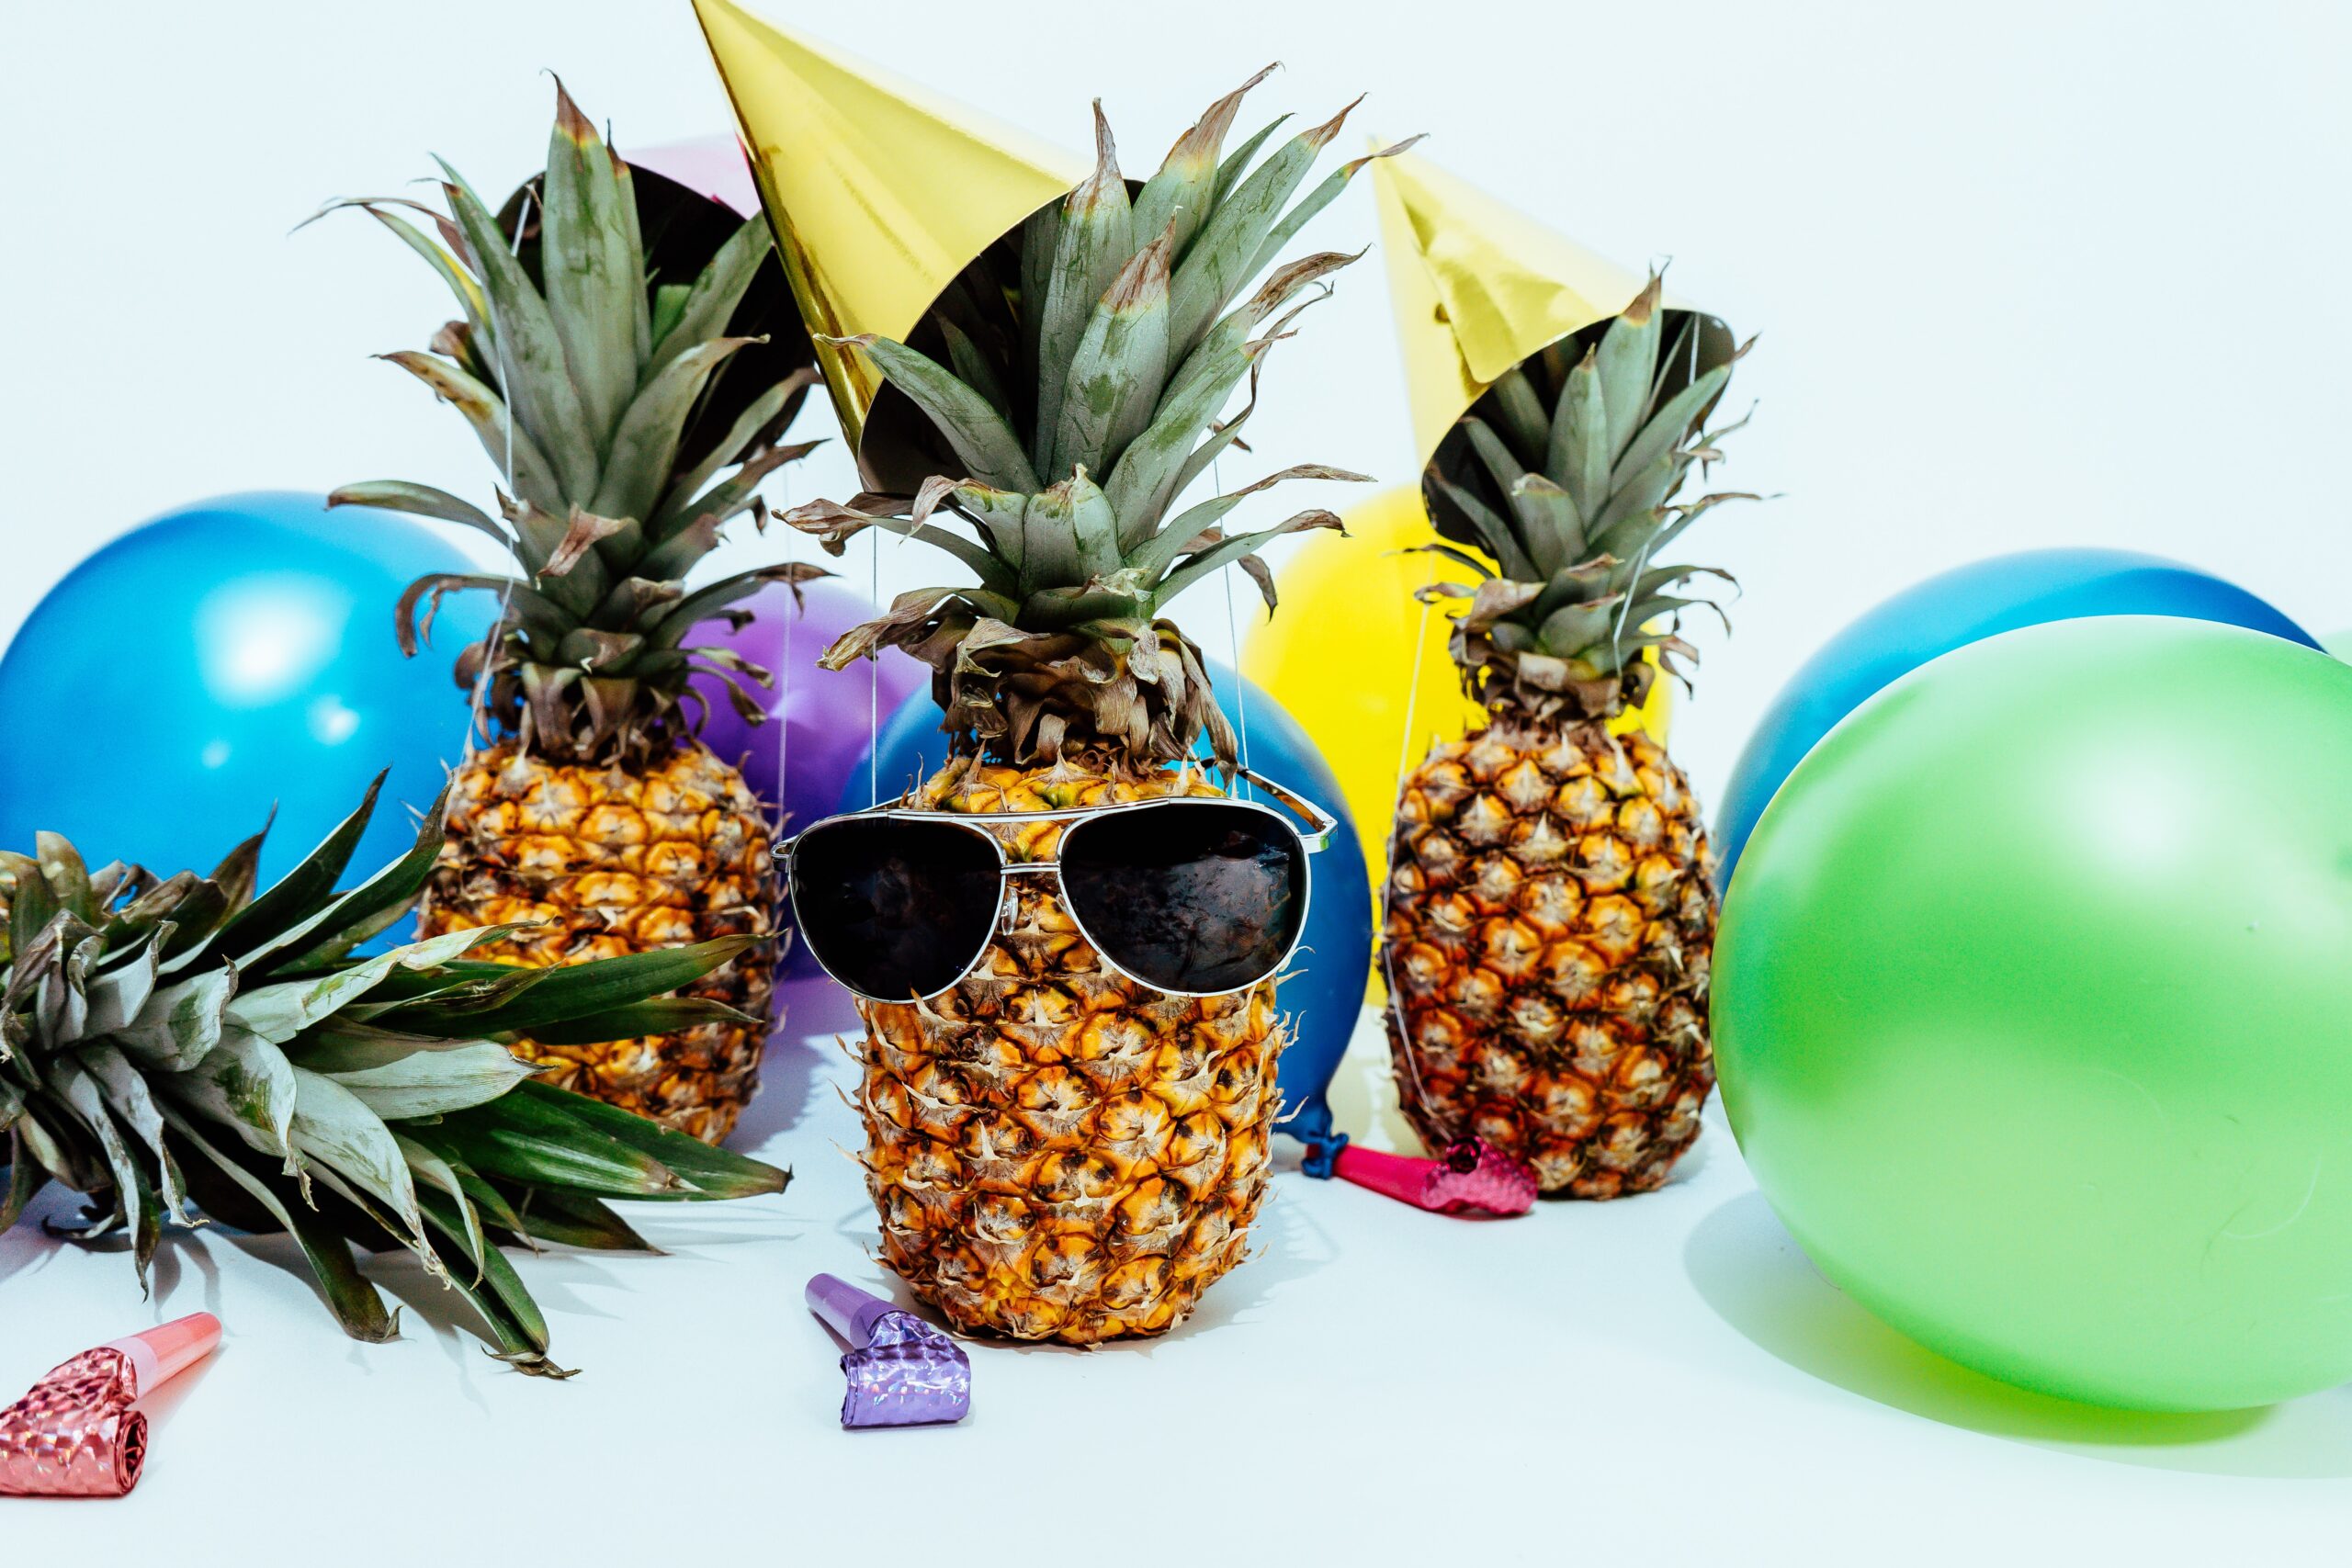 Three pineapples wearing party hats and sunglasses surrounded by balloons